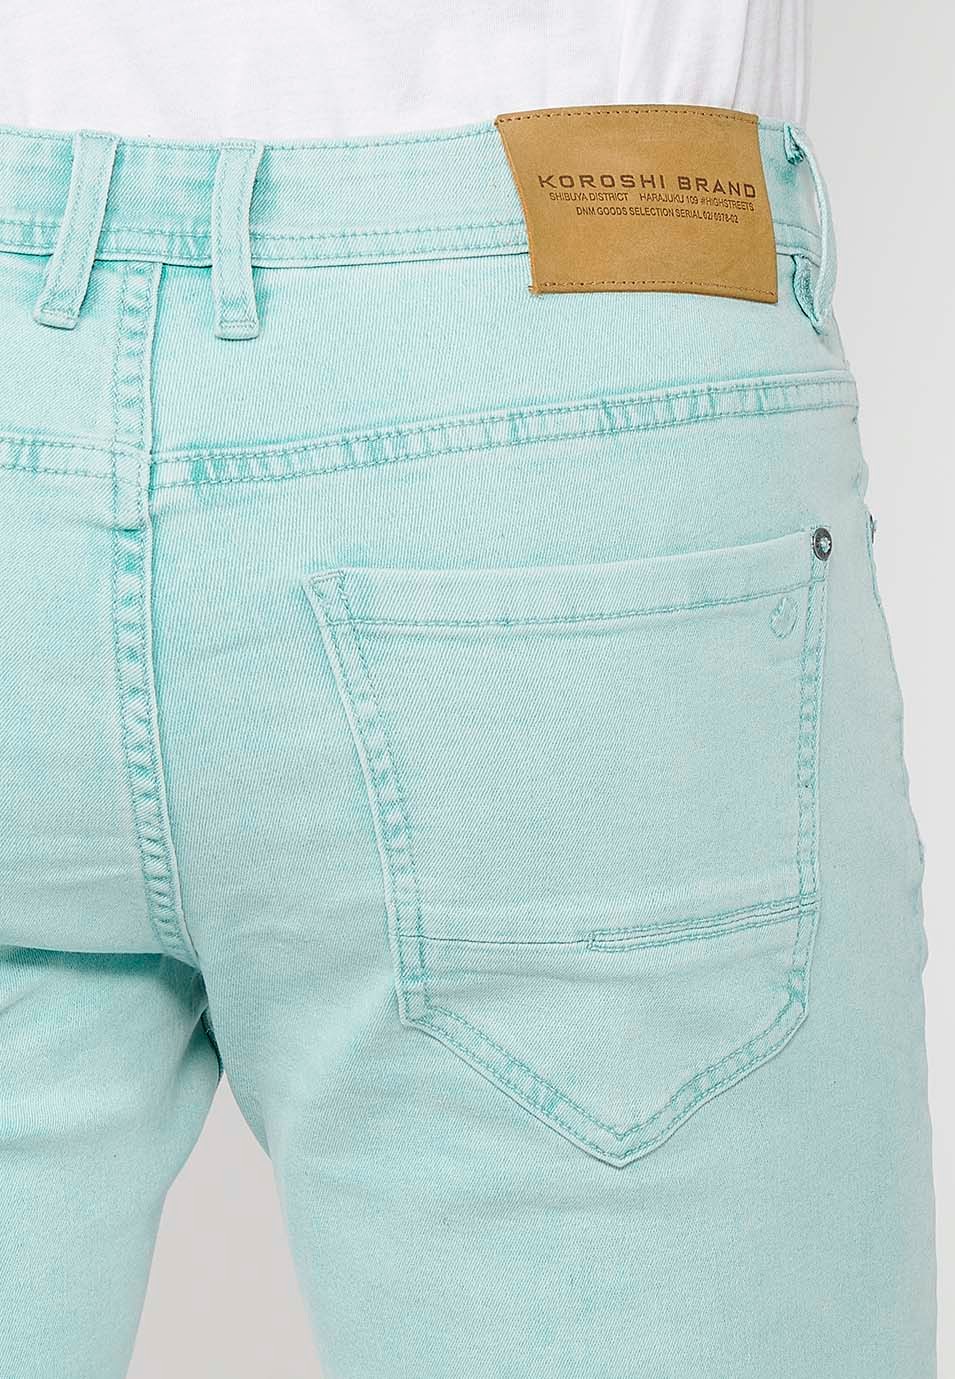 Shorts with turn-up closure with front zipper and button closure and five pockets, one blue pocket pocket for Men 9